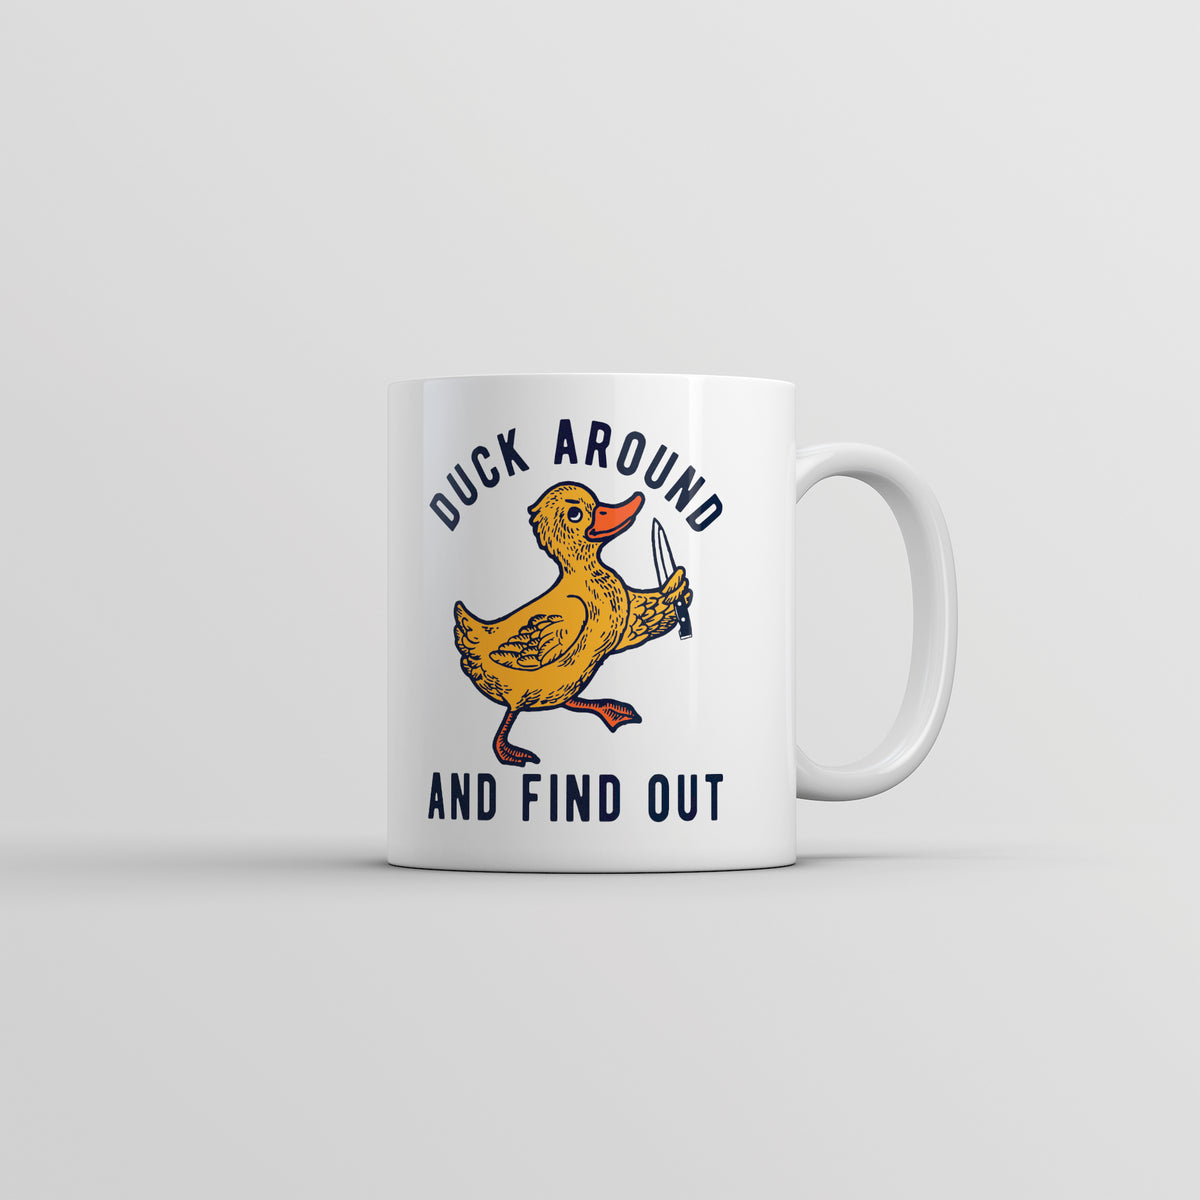 Funny White Duck Around And Find Out Coffee Mug Nerdy animal sarcastic Tee